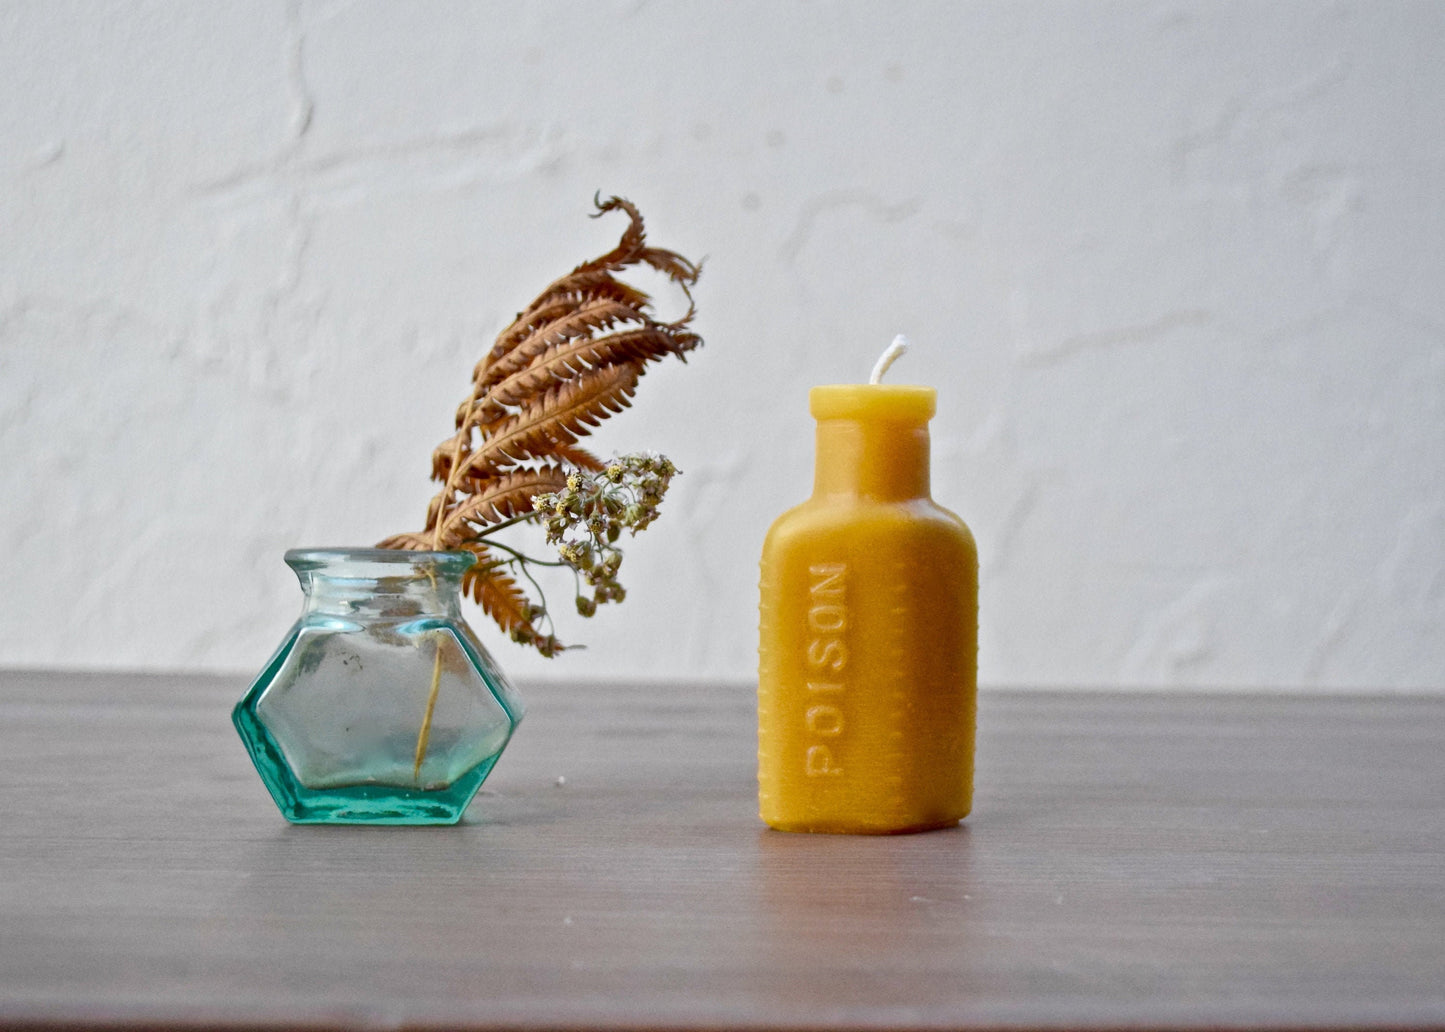 Poison Bottle Candle in Pure Beeswax - Antique 1800s Apothecary Bottle Candle, Burnable Bottle, Beeswax, Beeswax Candle, Vintage